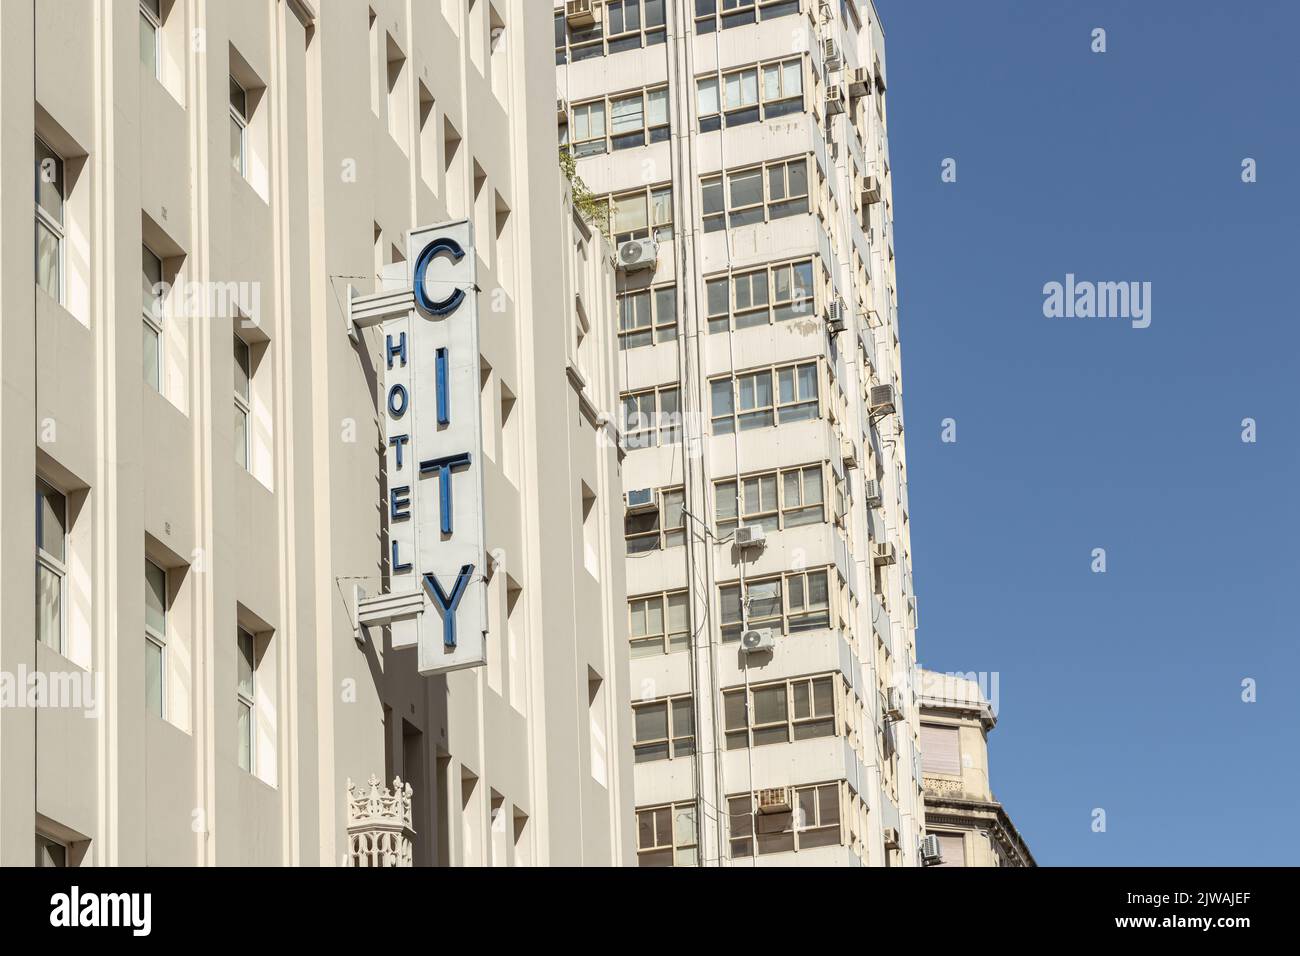 Buenos Aires, Argentina - September 2nd, 2022: Sign on the facade of a hotel. Stock Photo